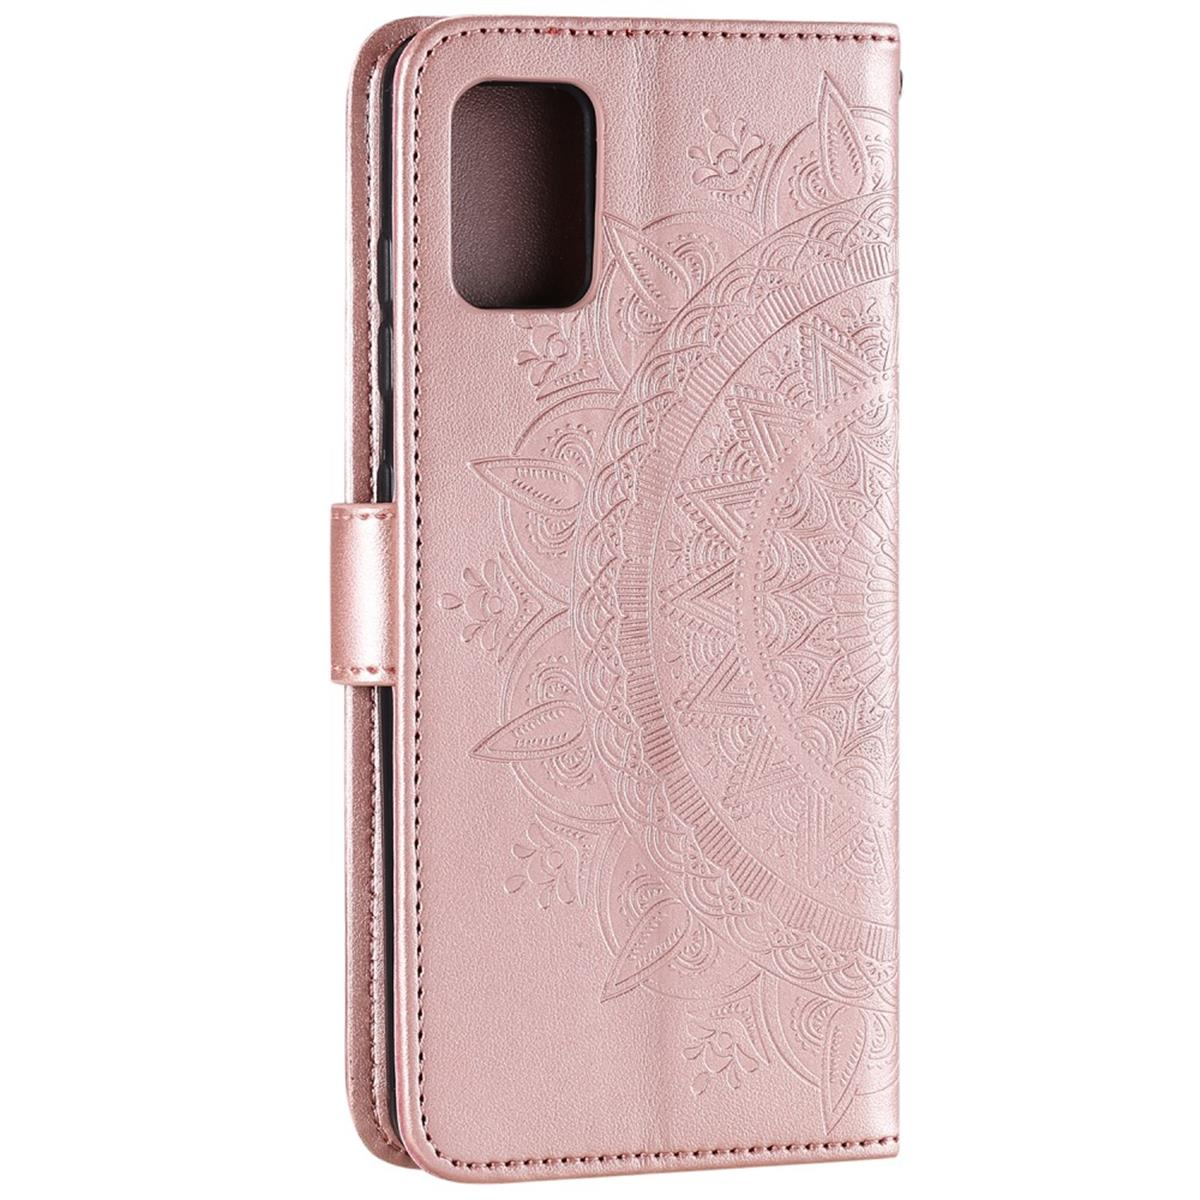 COVERKINGZ Klapphülle mit Mandala Roségold Bookcover, Samsung, Muster, A51, Galaxy